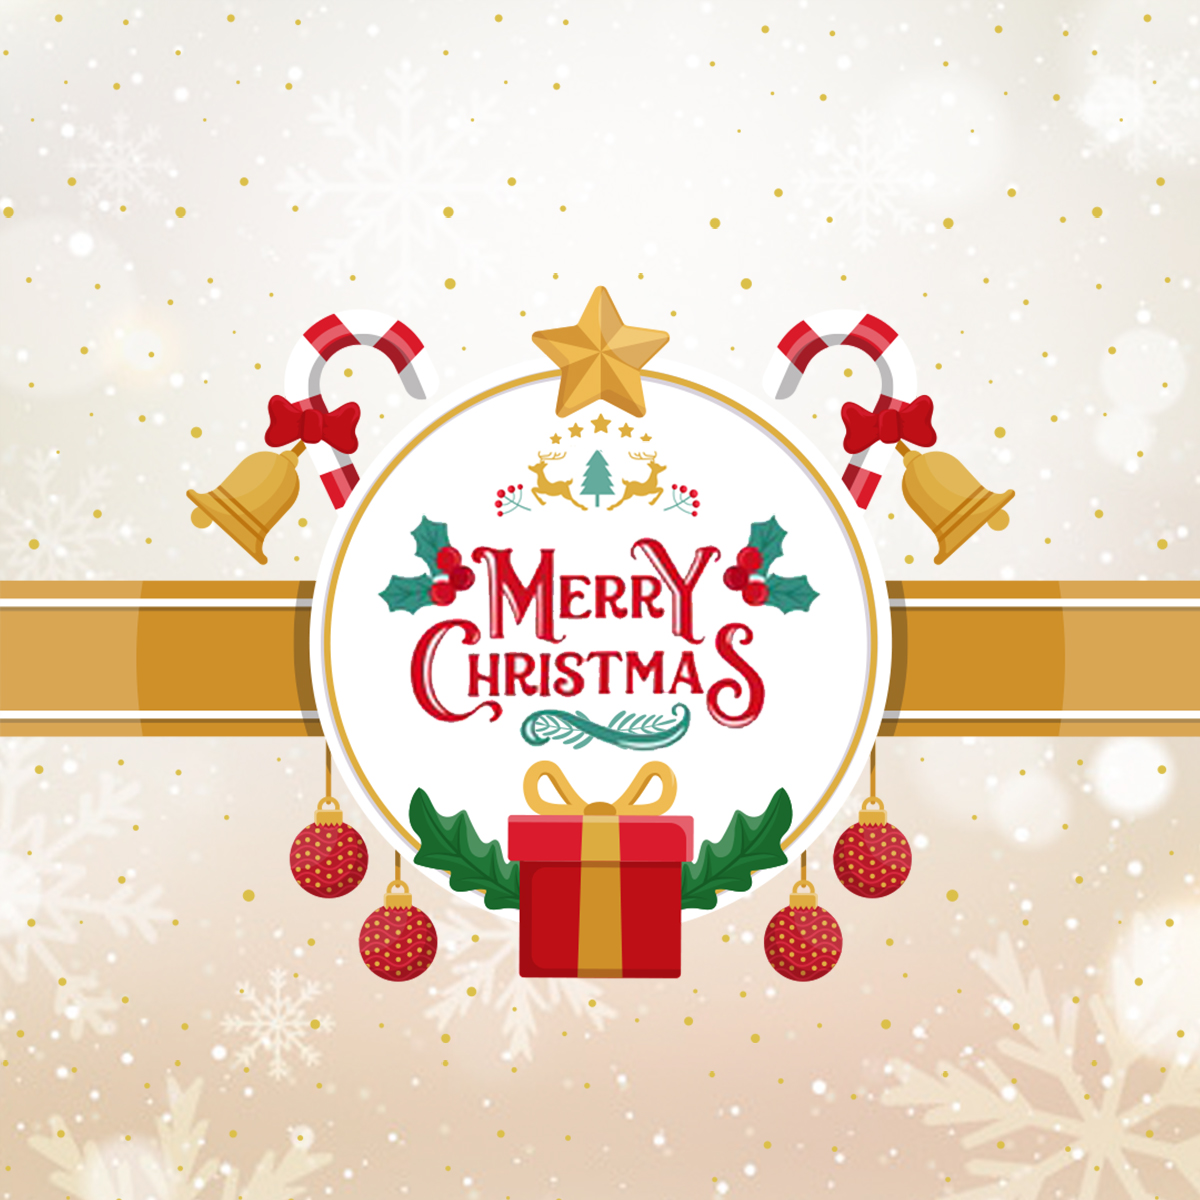 Download Merry Christmas Banner Background Free Psd. CorelDraw Design (Download Free CDR, Vector, Stock Image, Tutorials, Tips & Tricks)